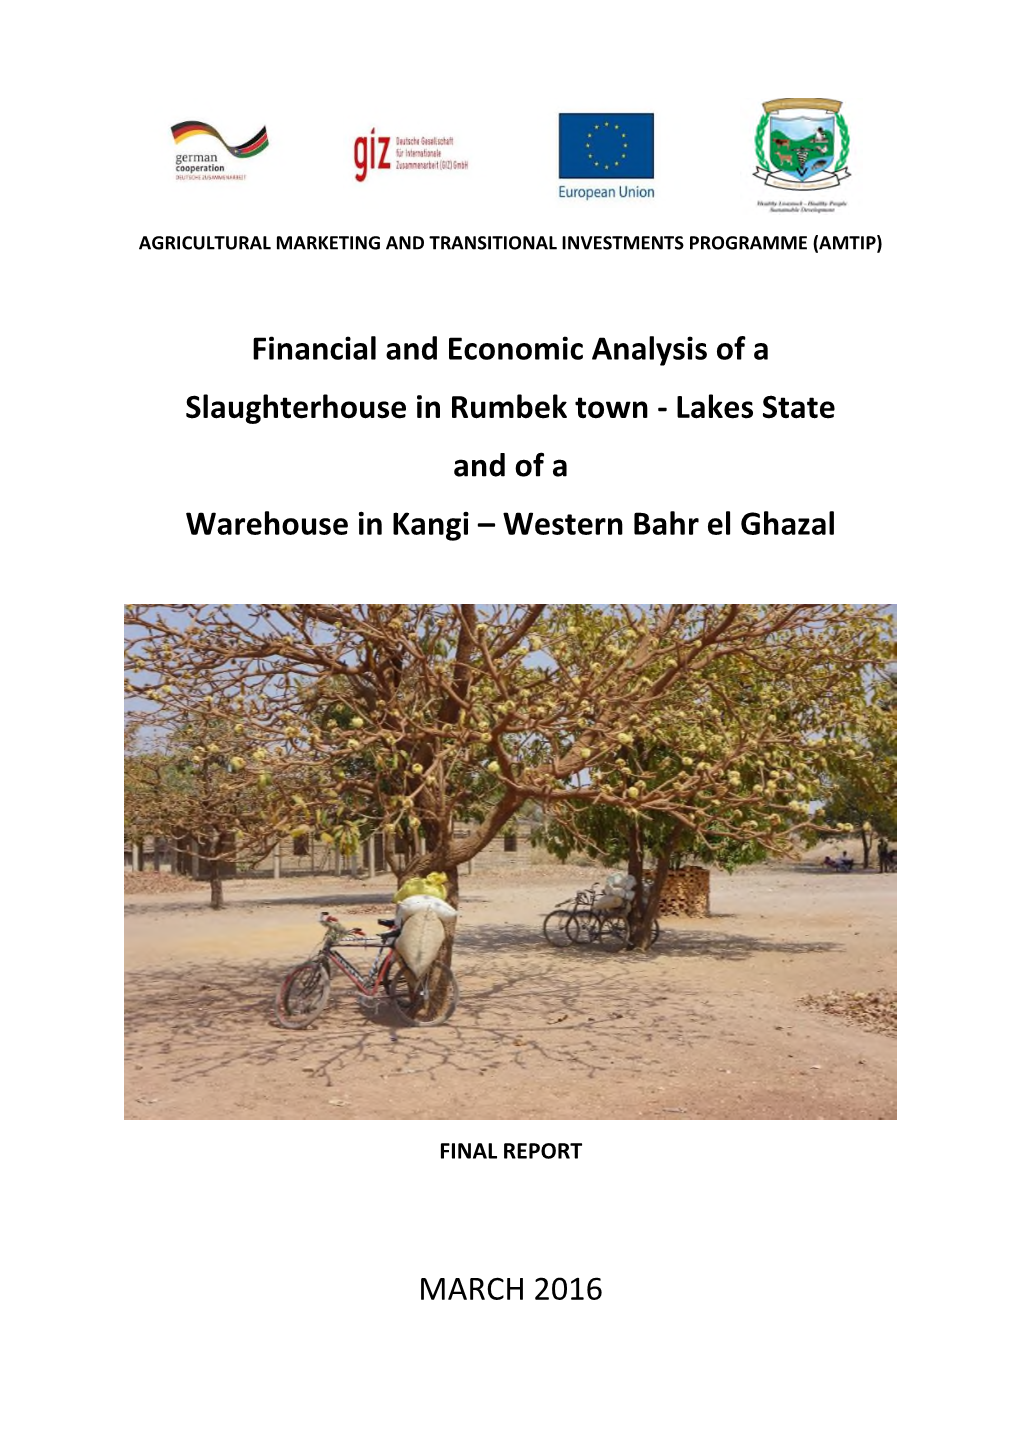 Financial and Economic Analysis of a Slaughterhouse in Rumbek Town - Lakes State and of a Warehouse in Kangi – Western Bahr El Ghazal